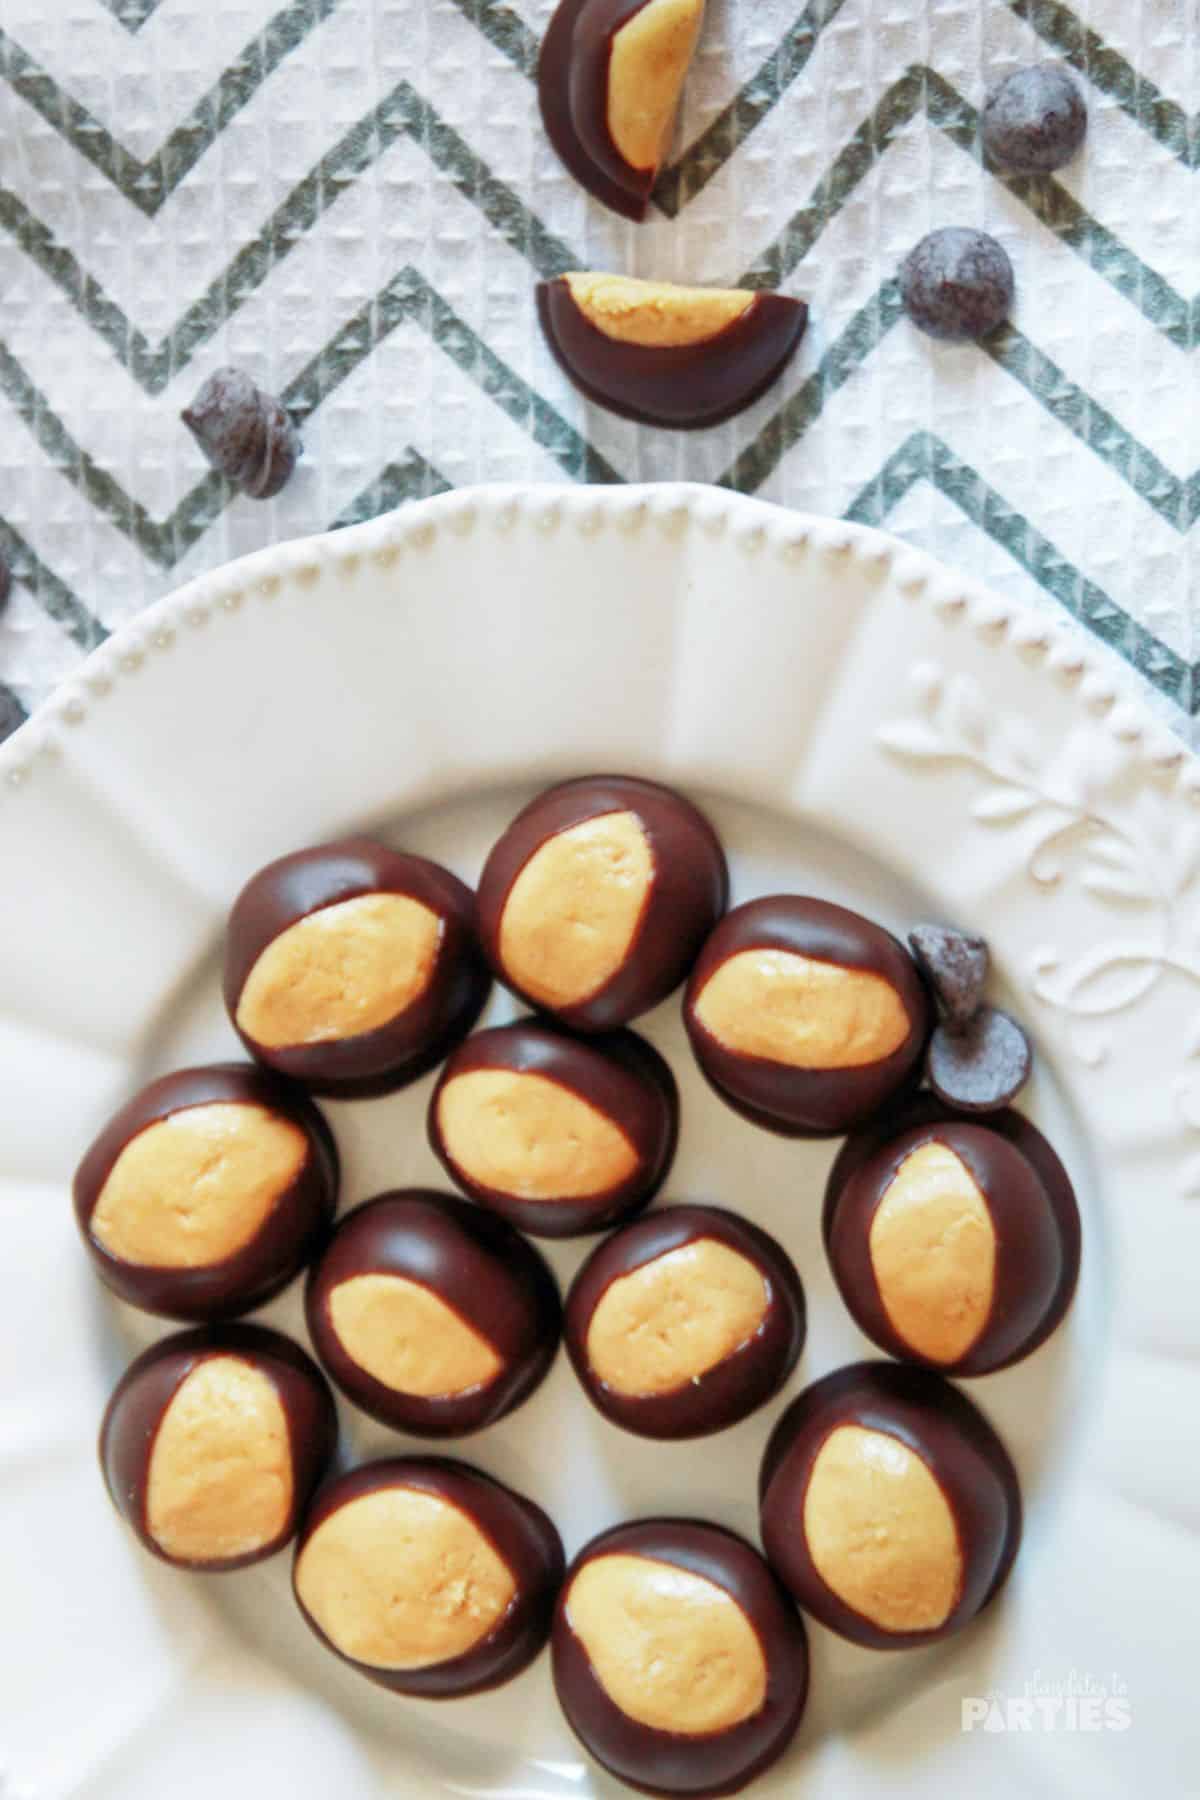 Peanut Butter Balls with Chocolate on a white plate.